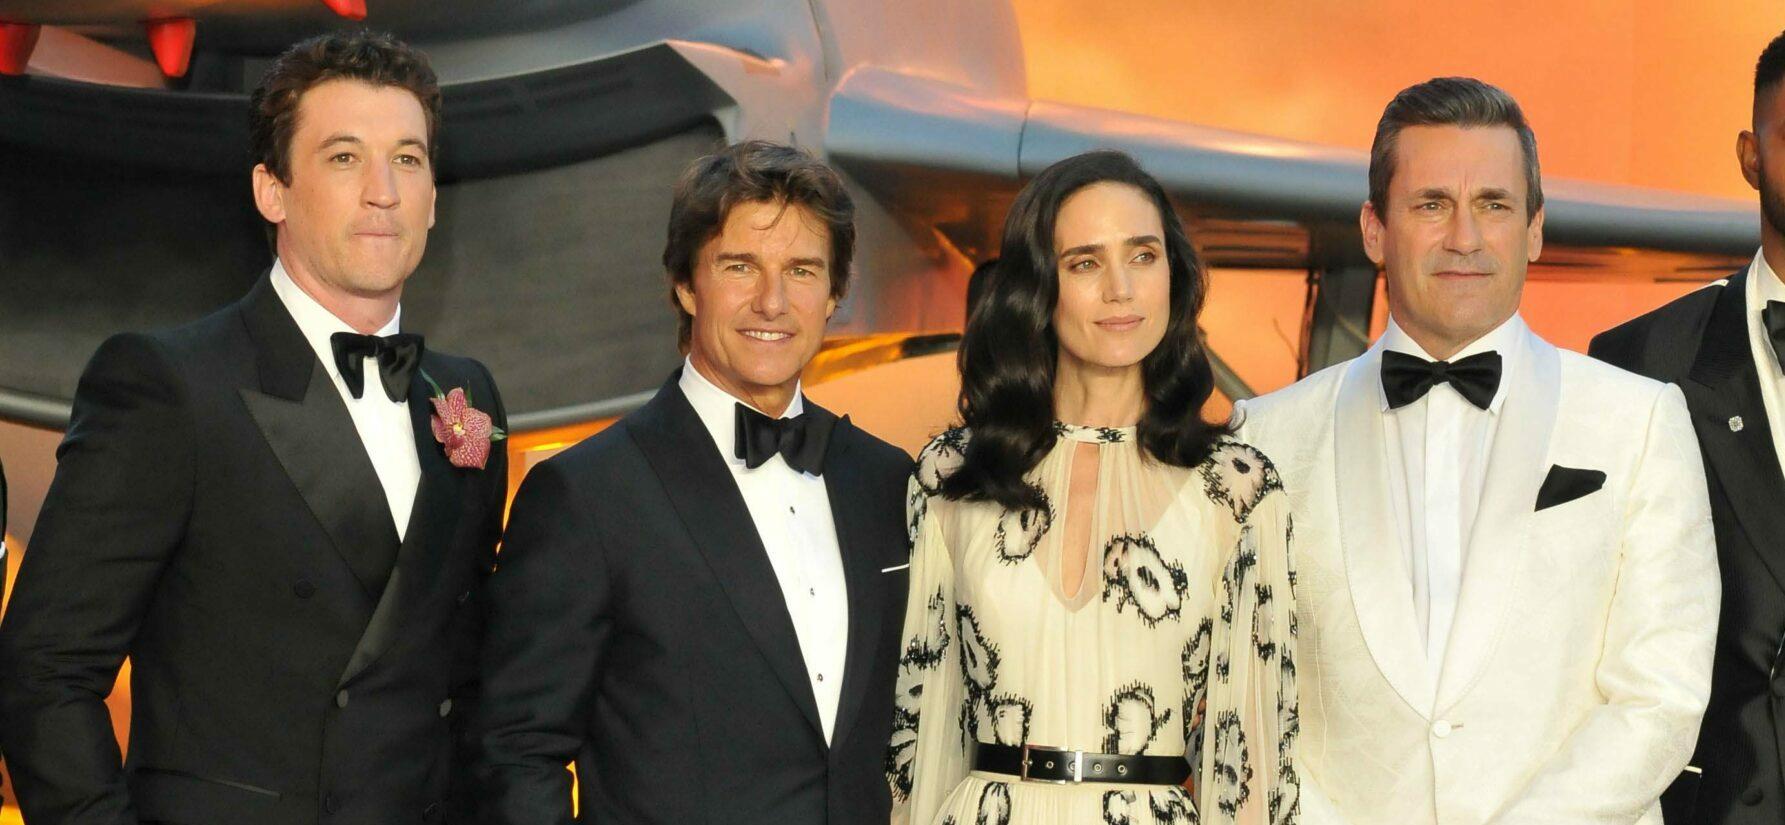 Miles Teller, Jennifer Connolly, Jerry Bruckheimer, Tom Cruise, The Duchess of Cambridge and Prince William attend the Top Gun Maverick Royal Film Performance, in Leicester Square, London. 19th May 2022. 20 May 2022 Pictured: Miles Teller, Tom Cruise, Jennifer Connolly and Jon Hamm attend the Top Gun Maverick Royal Film Performance, in Leicester Square, London. 19th May 2022. Photo: Andrew Sims The Sunday Times Material must be credited 